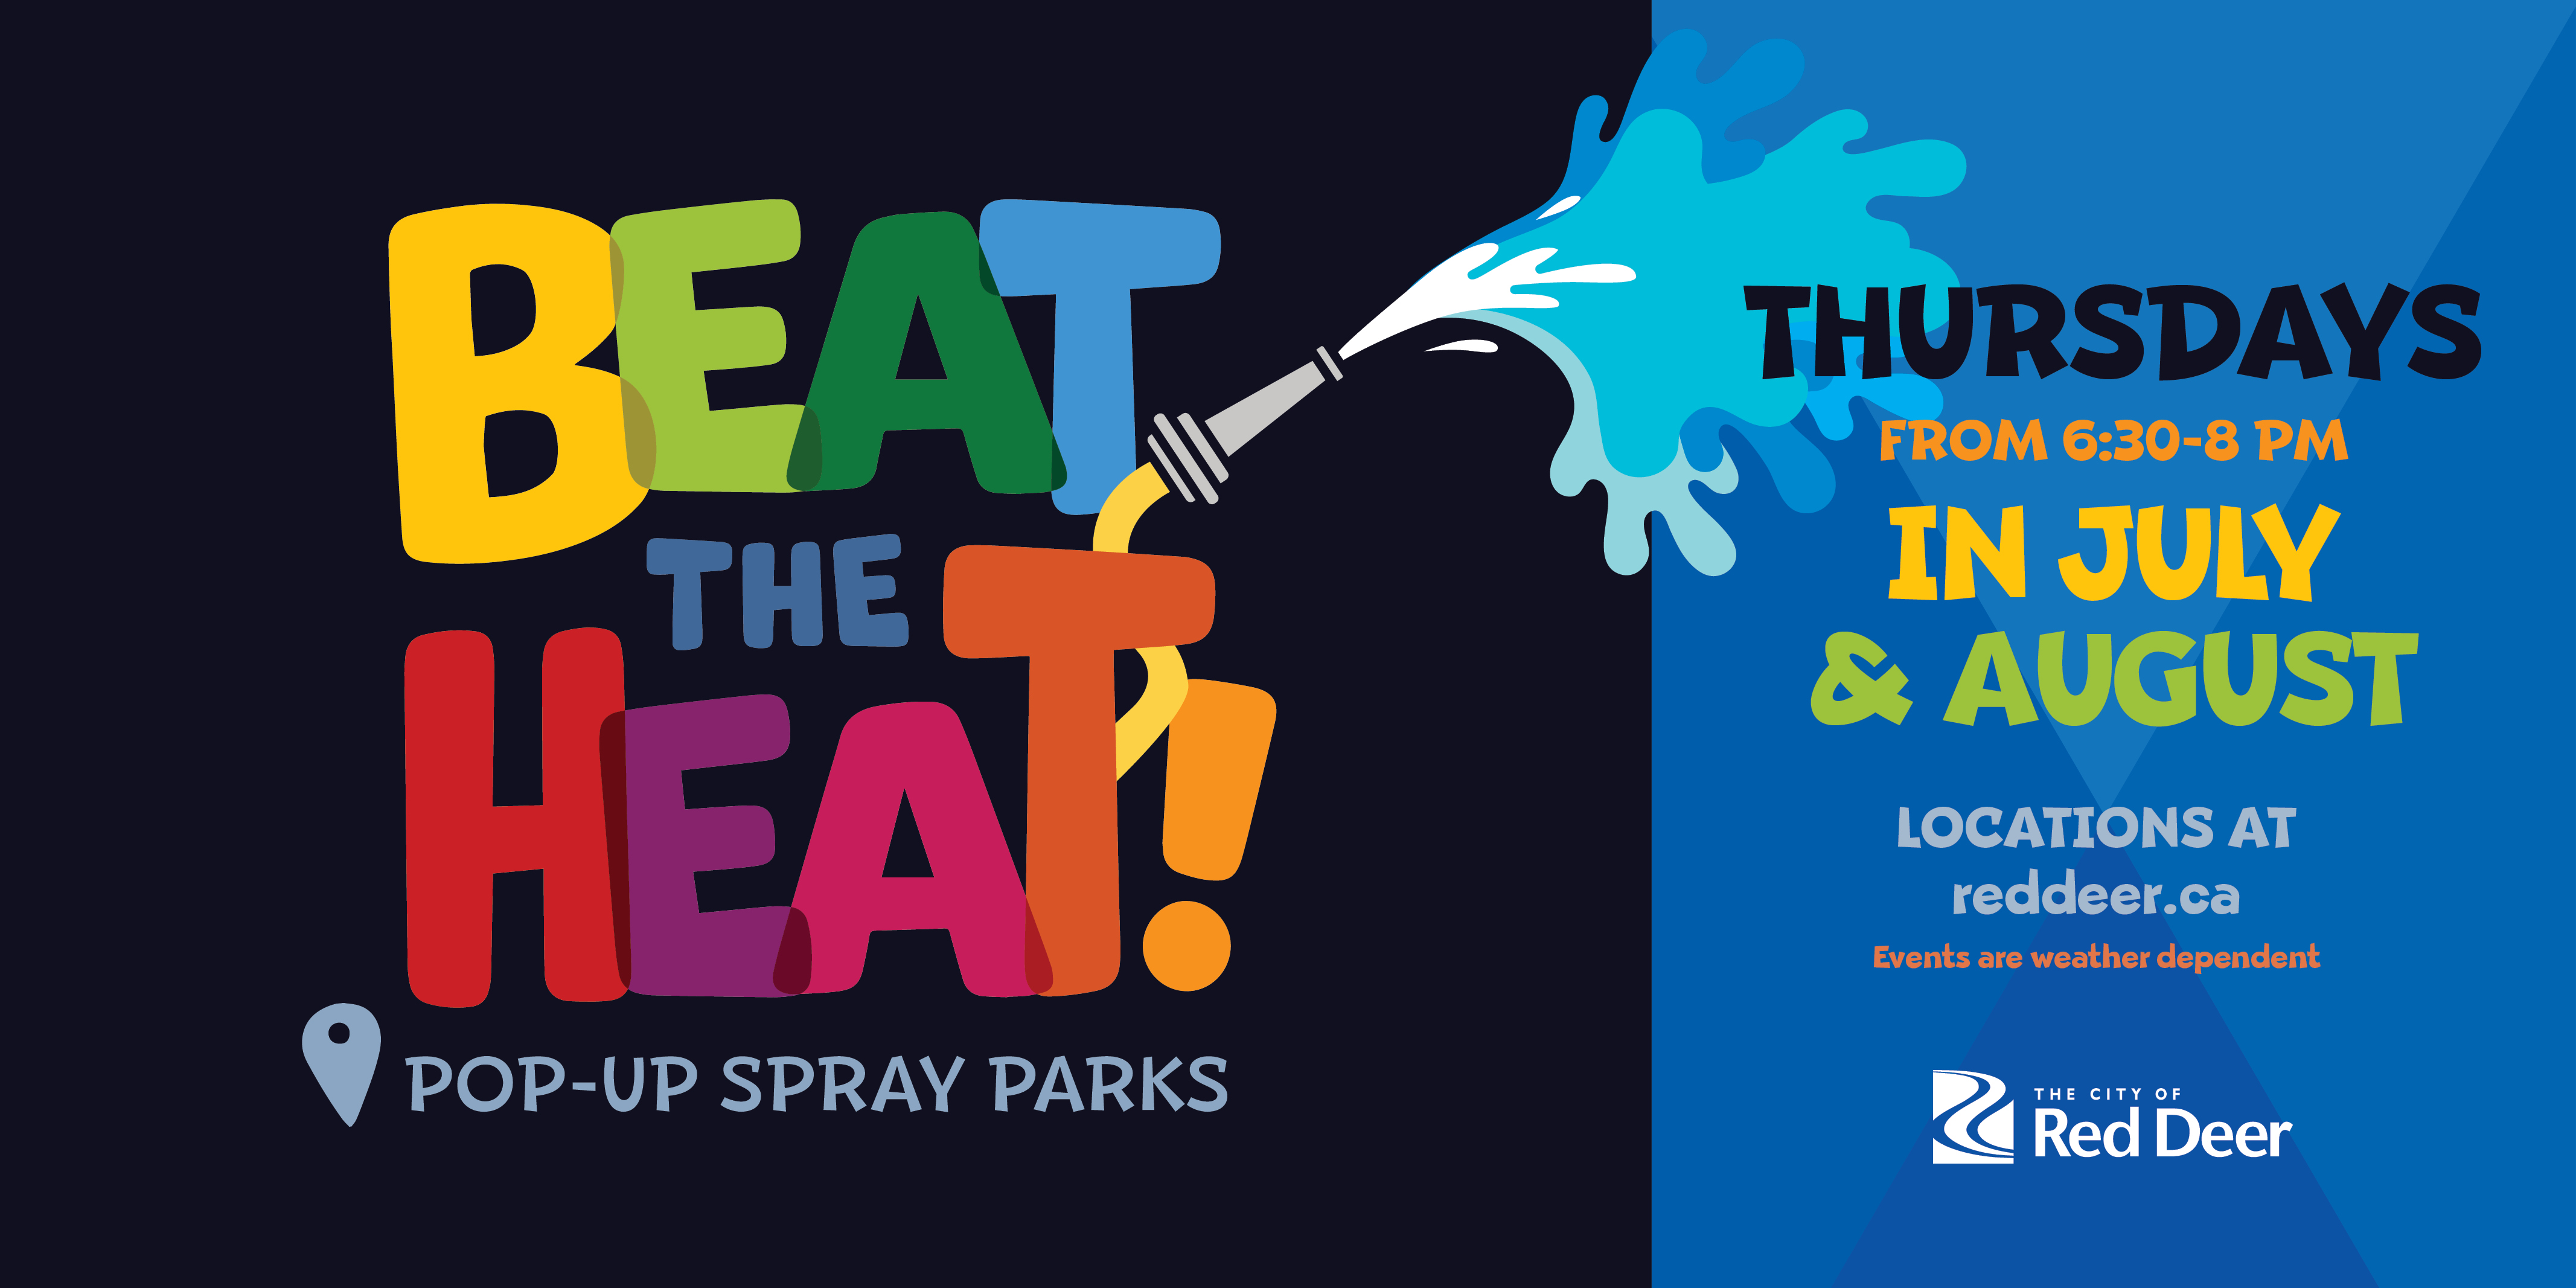 Graphic promoting the pop-up spray parks in Red Deer